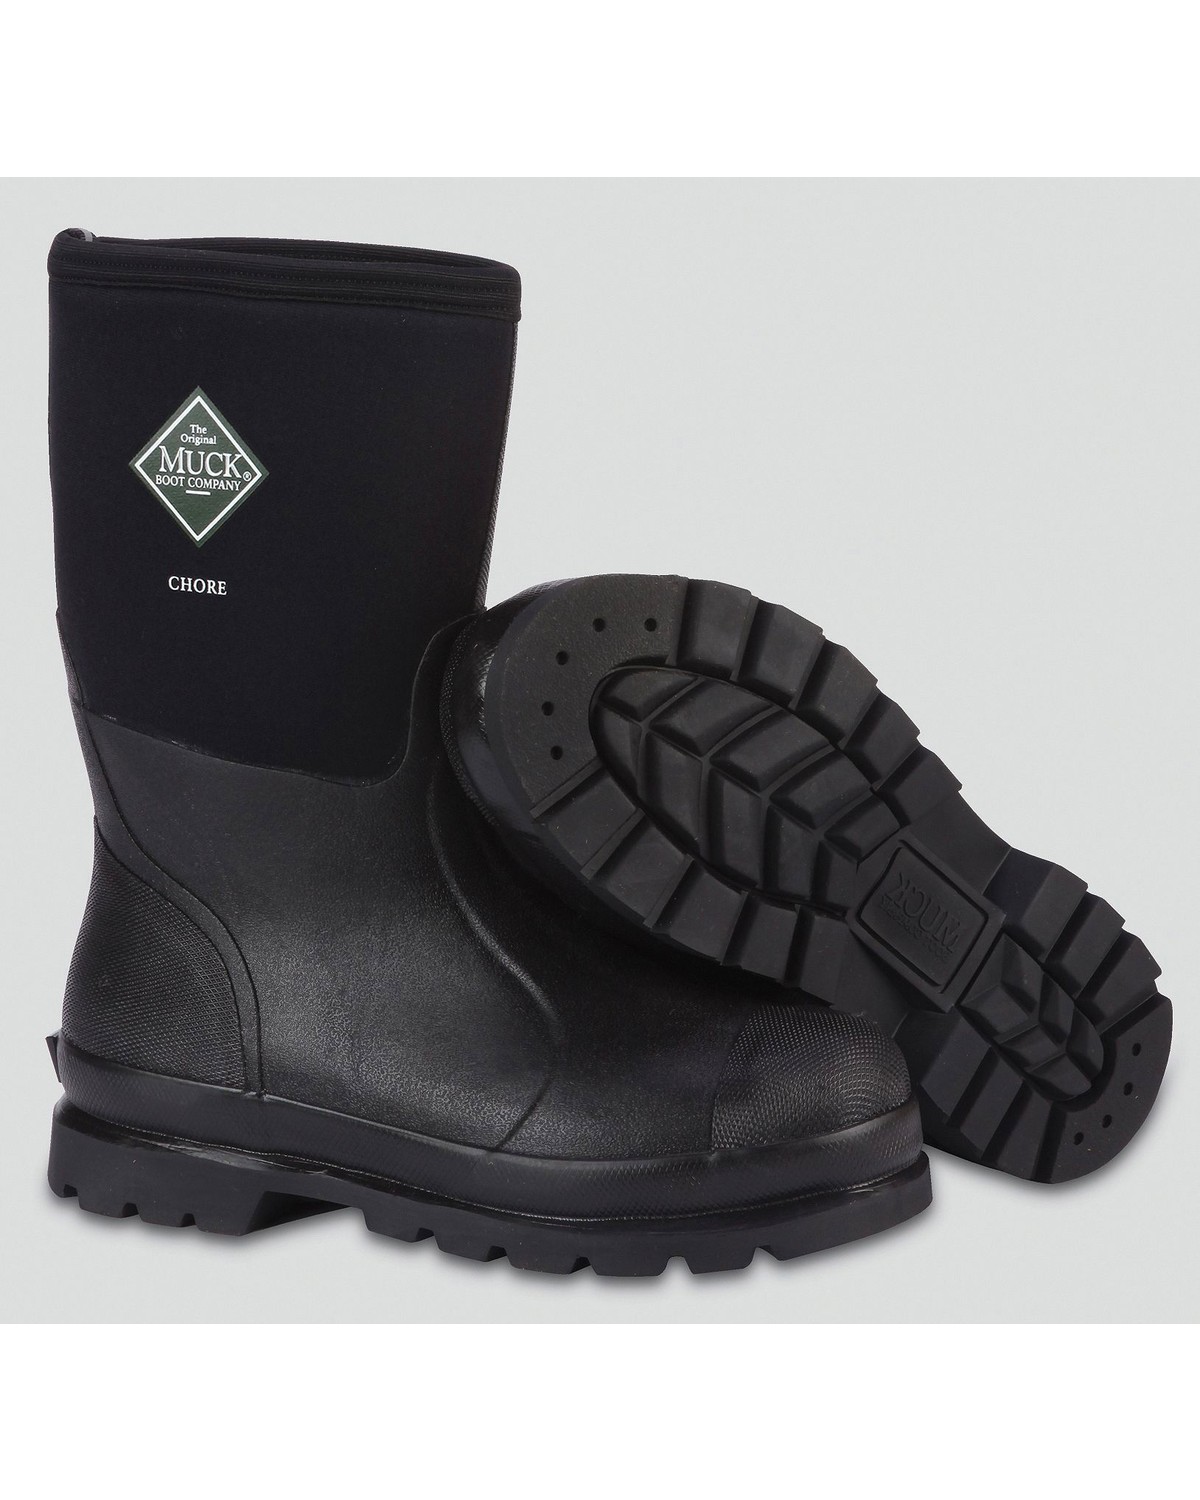 Muck Men/'s Chore All Conditions Steel Toe Work Boots Black